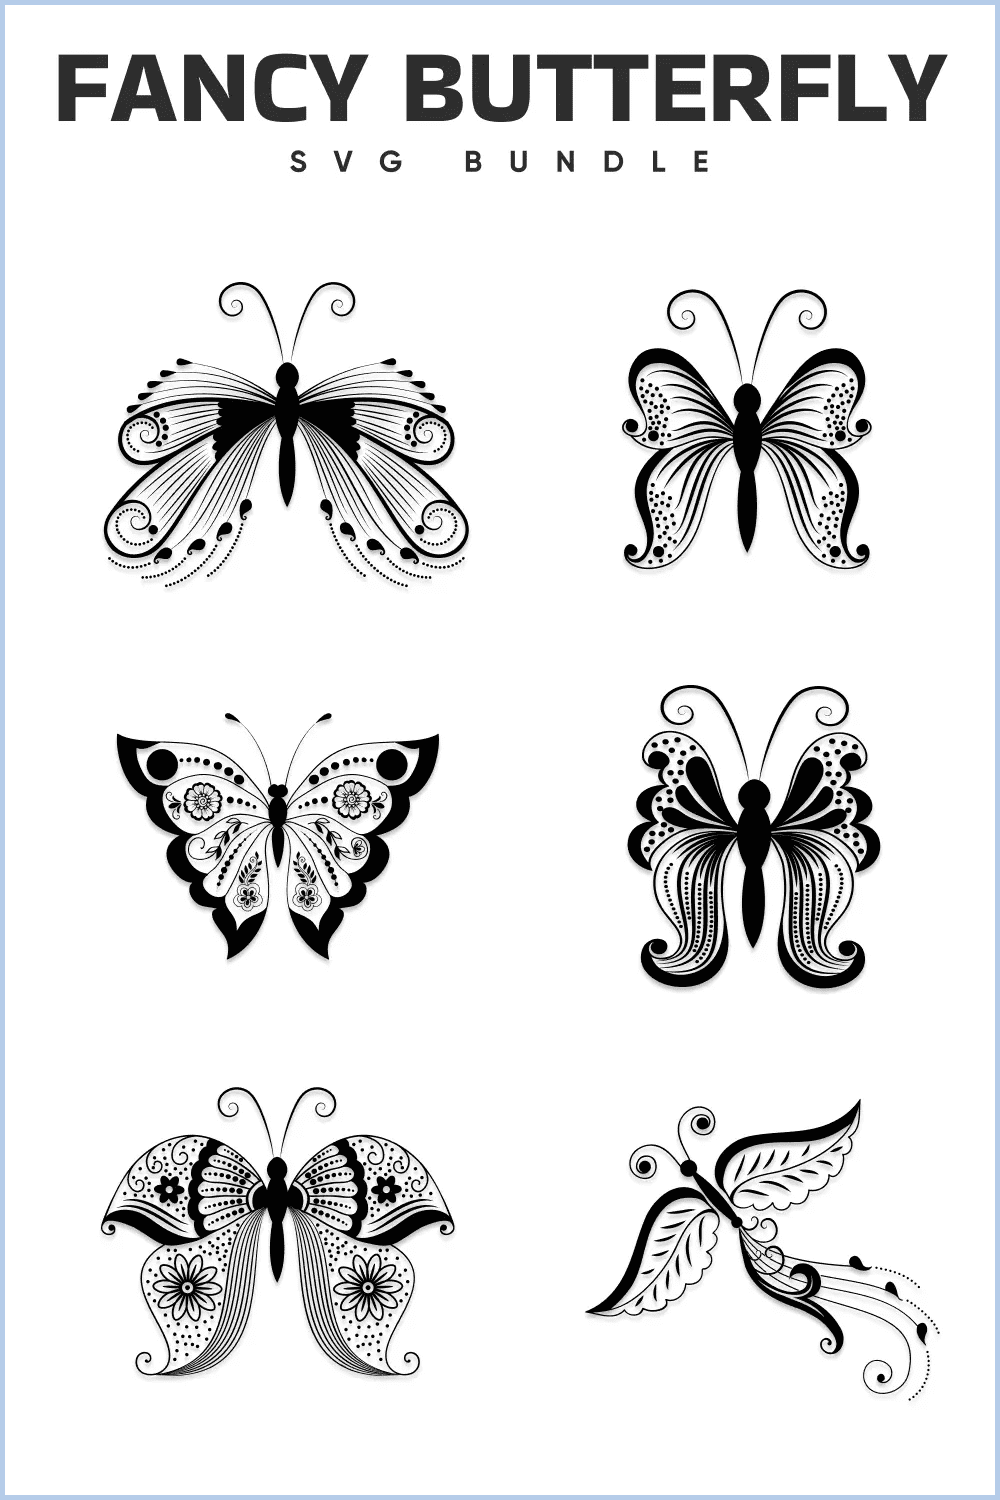 6 sketches of butterflies with different wing shapes.